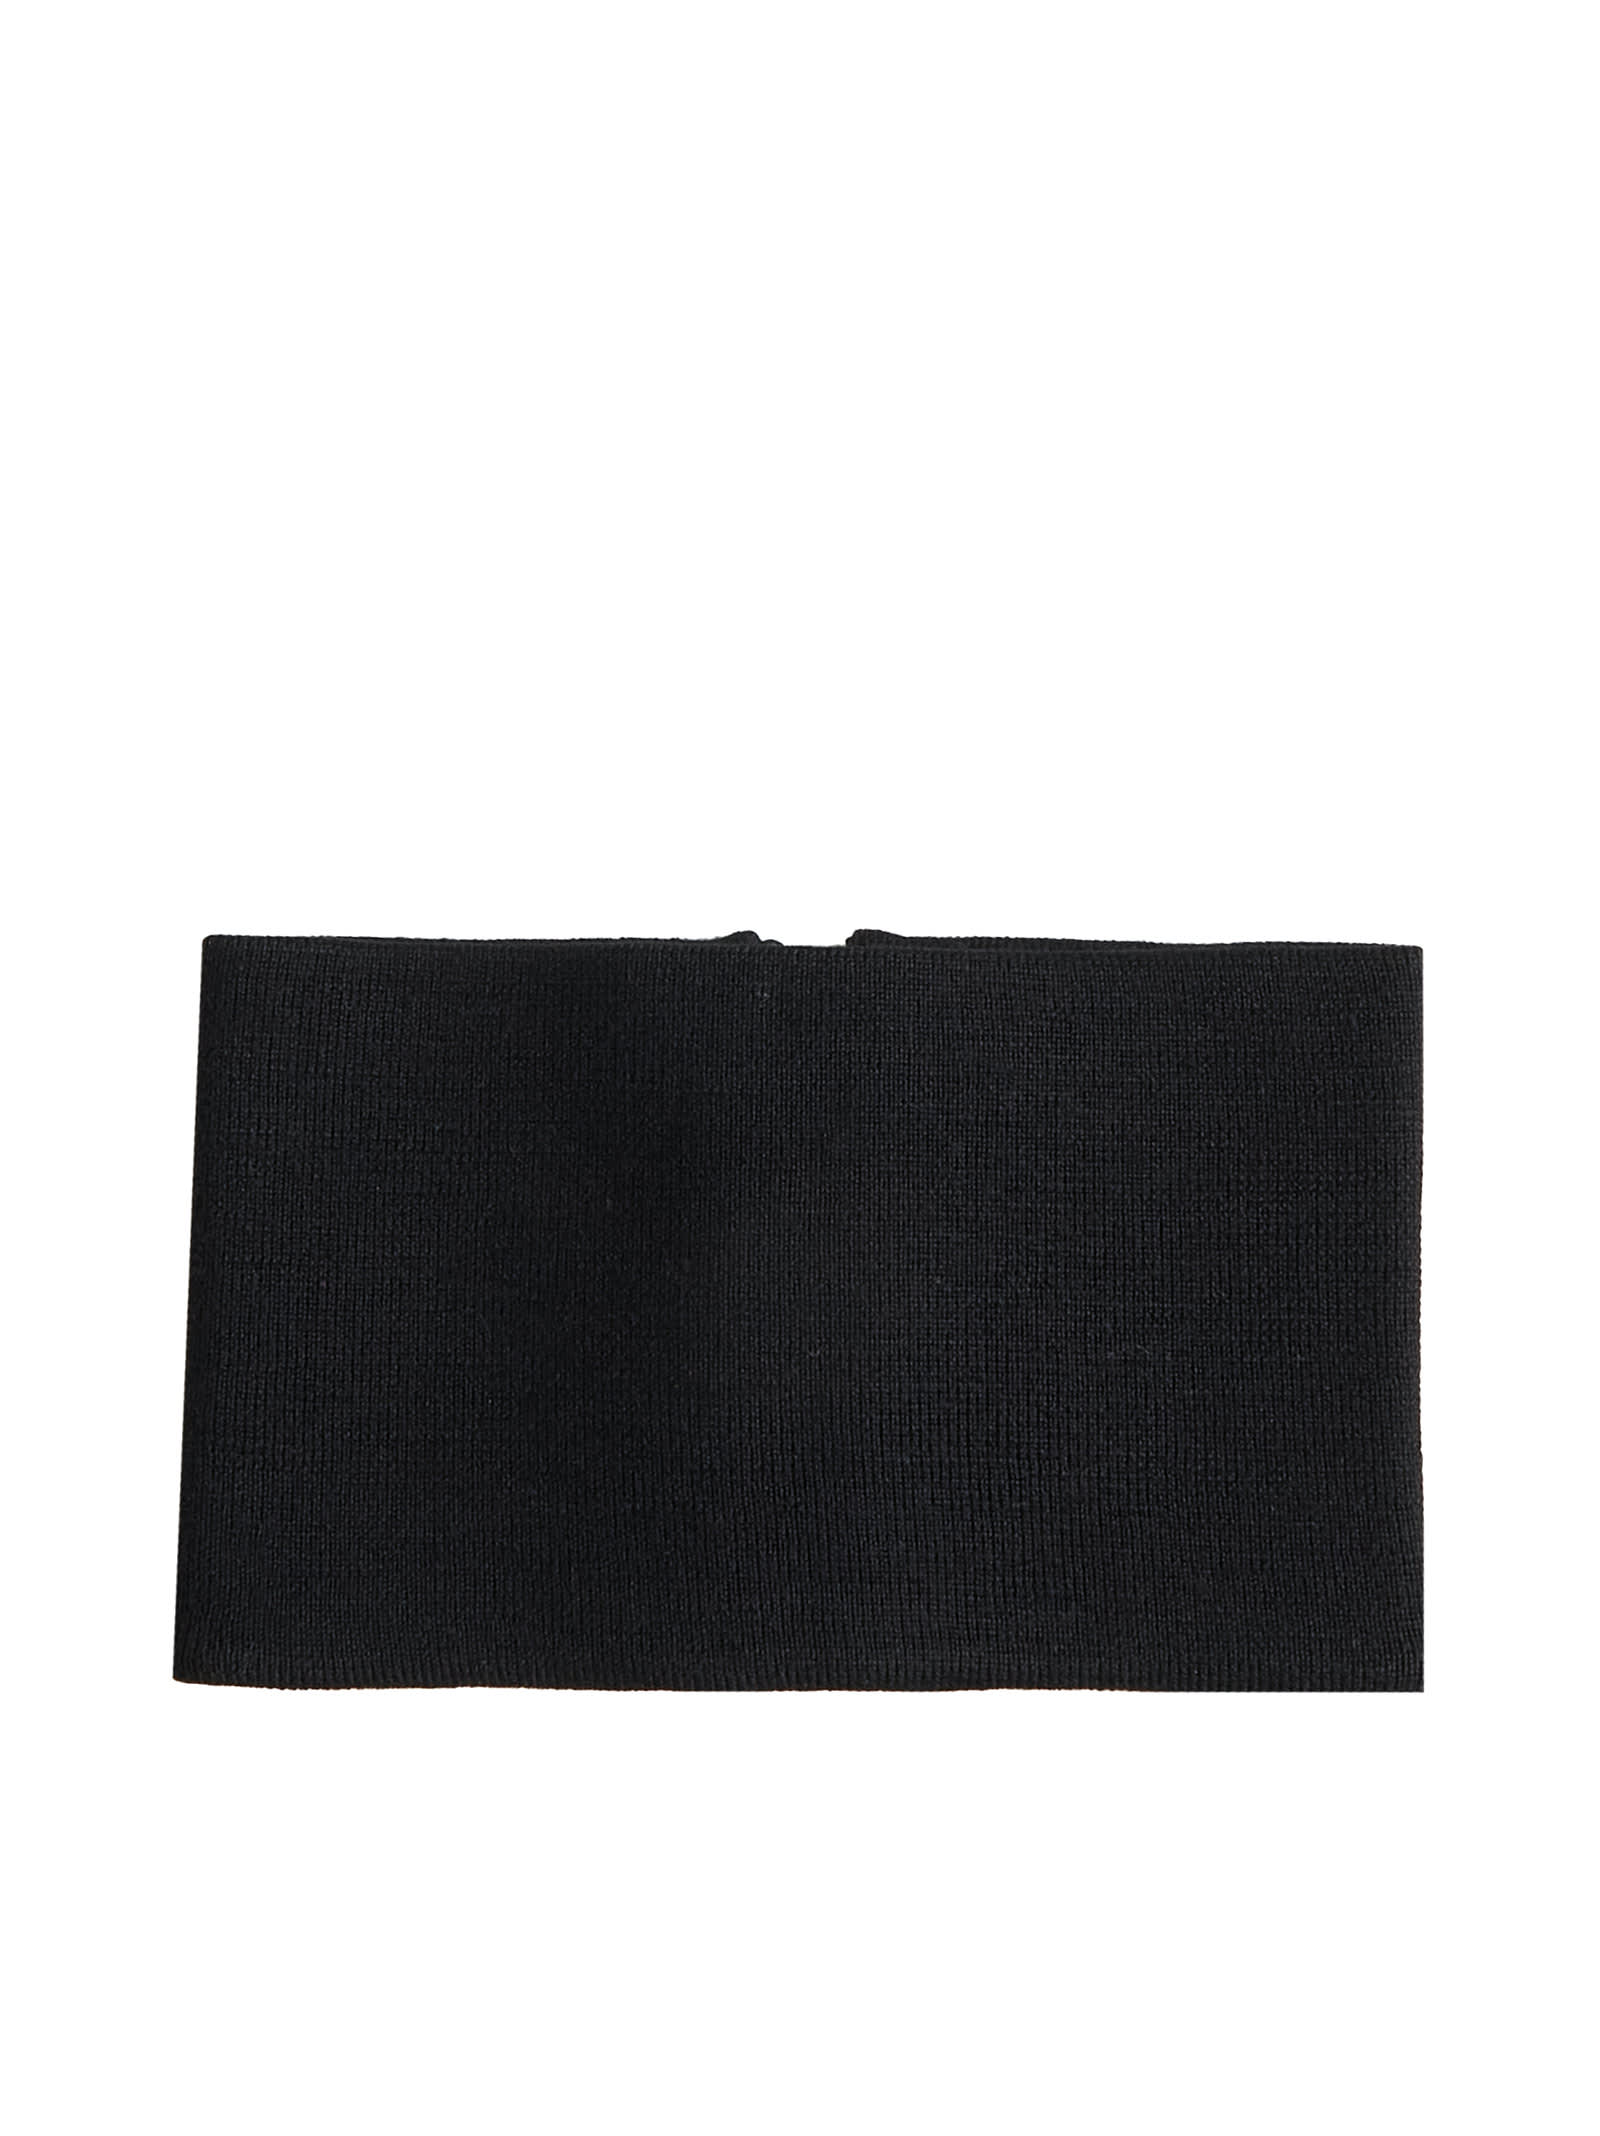 Shop Jw Anderson Accessory In Black